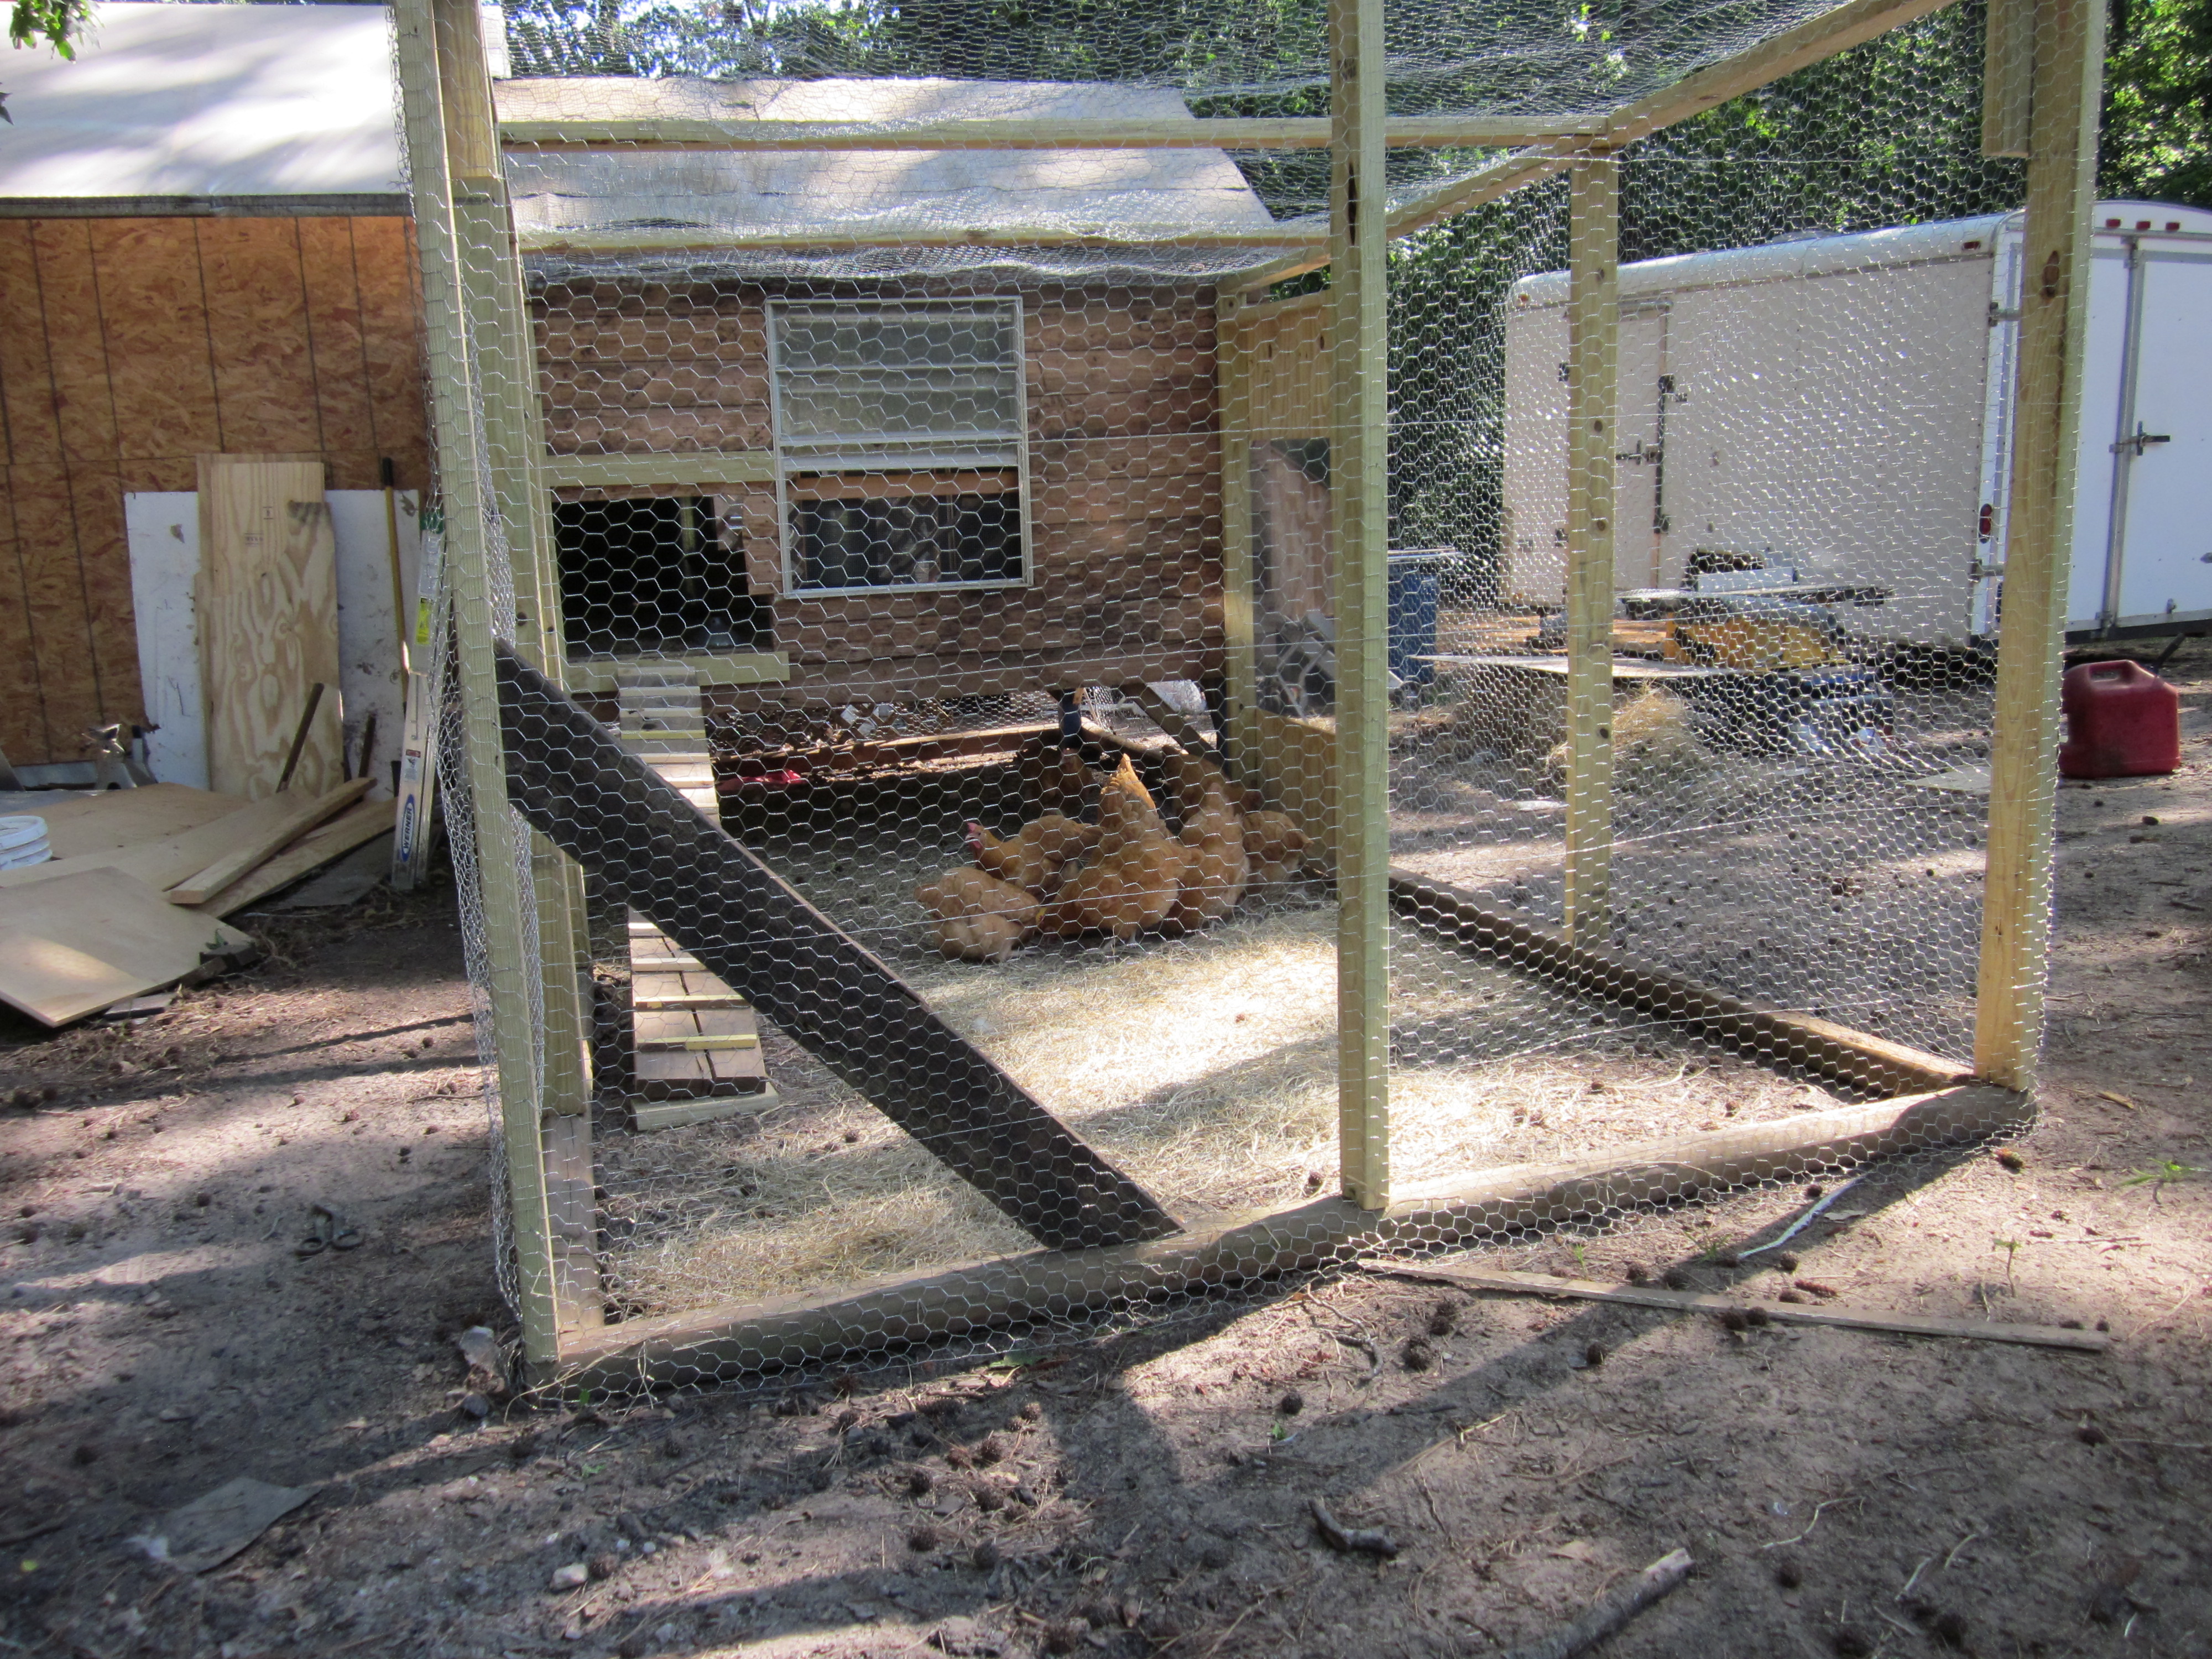 End view of the chicken yard.